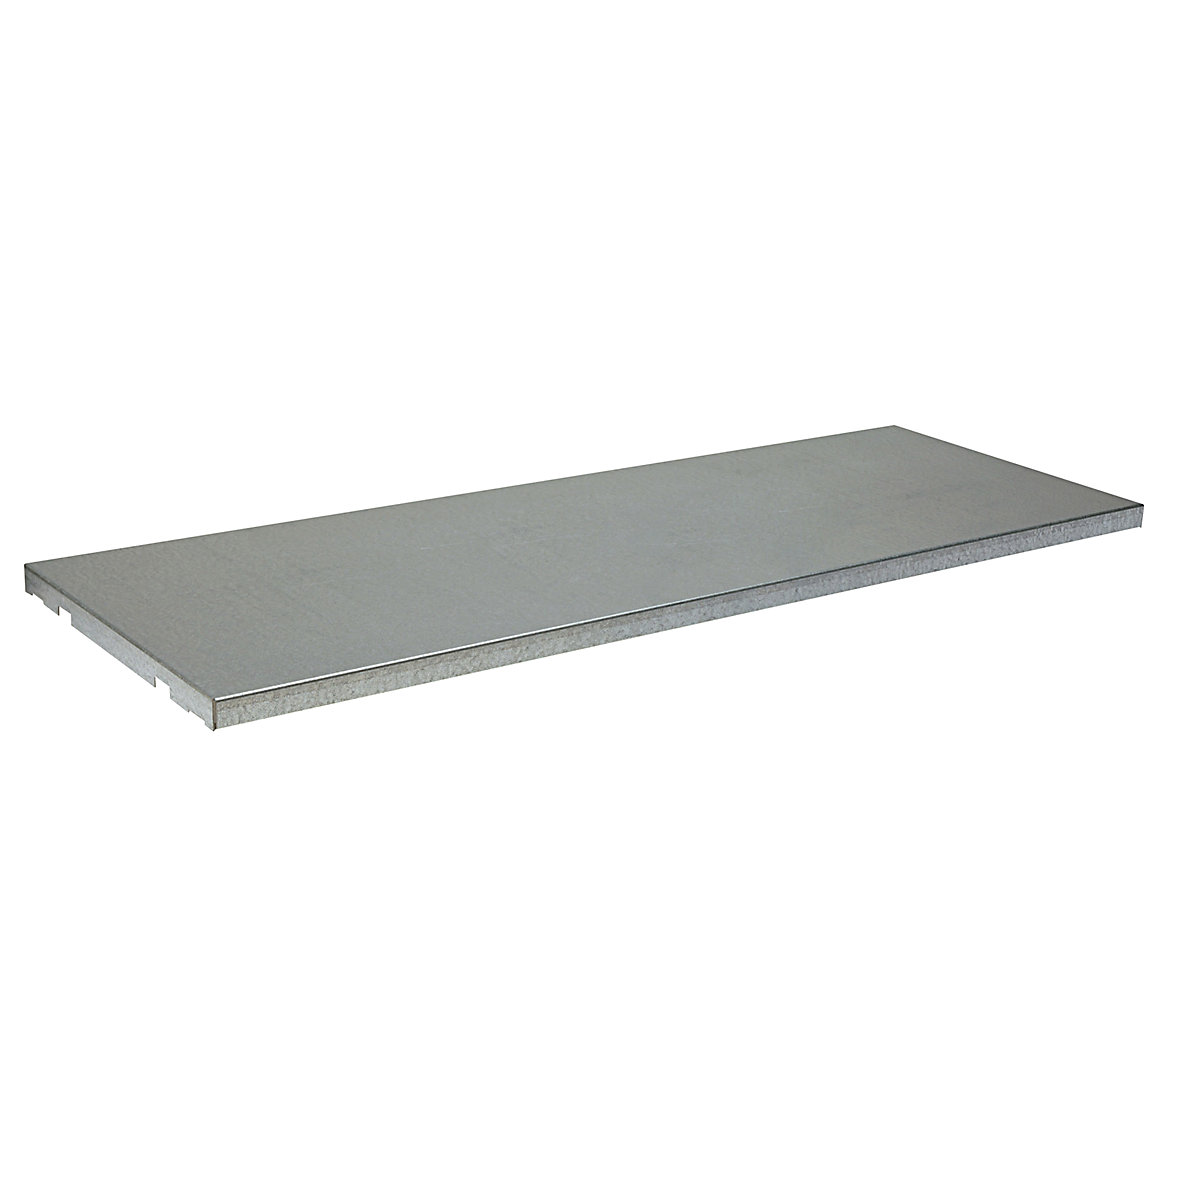 Shelf, zinc plated – Justrite, for environmentally- and water hazardous media, WxD 889 x 559 mm